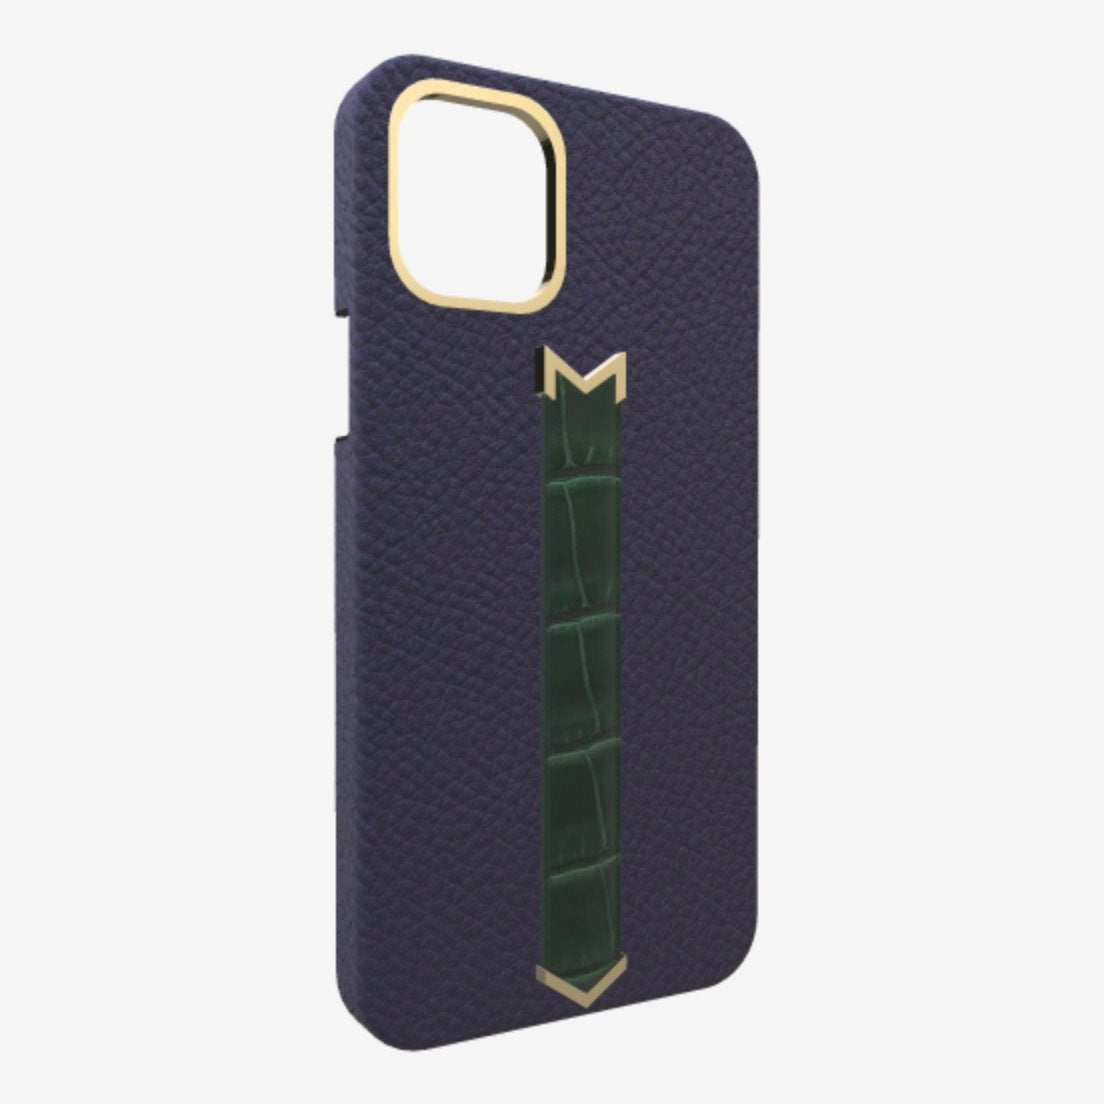 Gold Finger Strap Case for iPhone 13 Pro Max in Genuine Calfskin and Alligator Navy Blue Jungle Green 